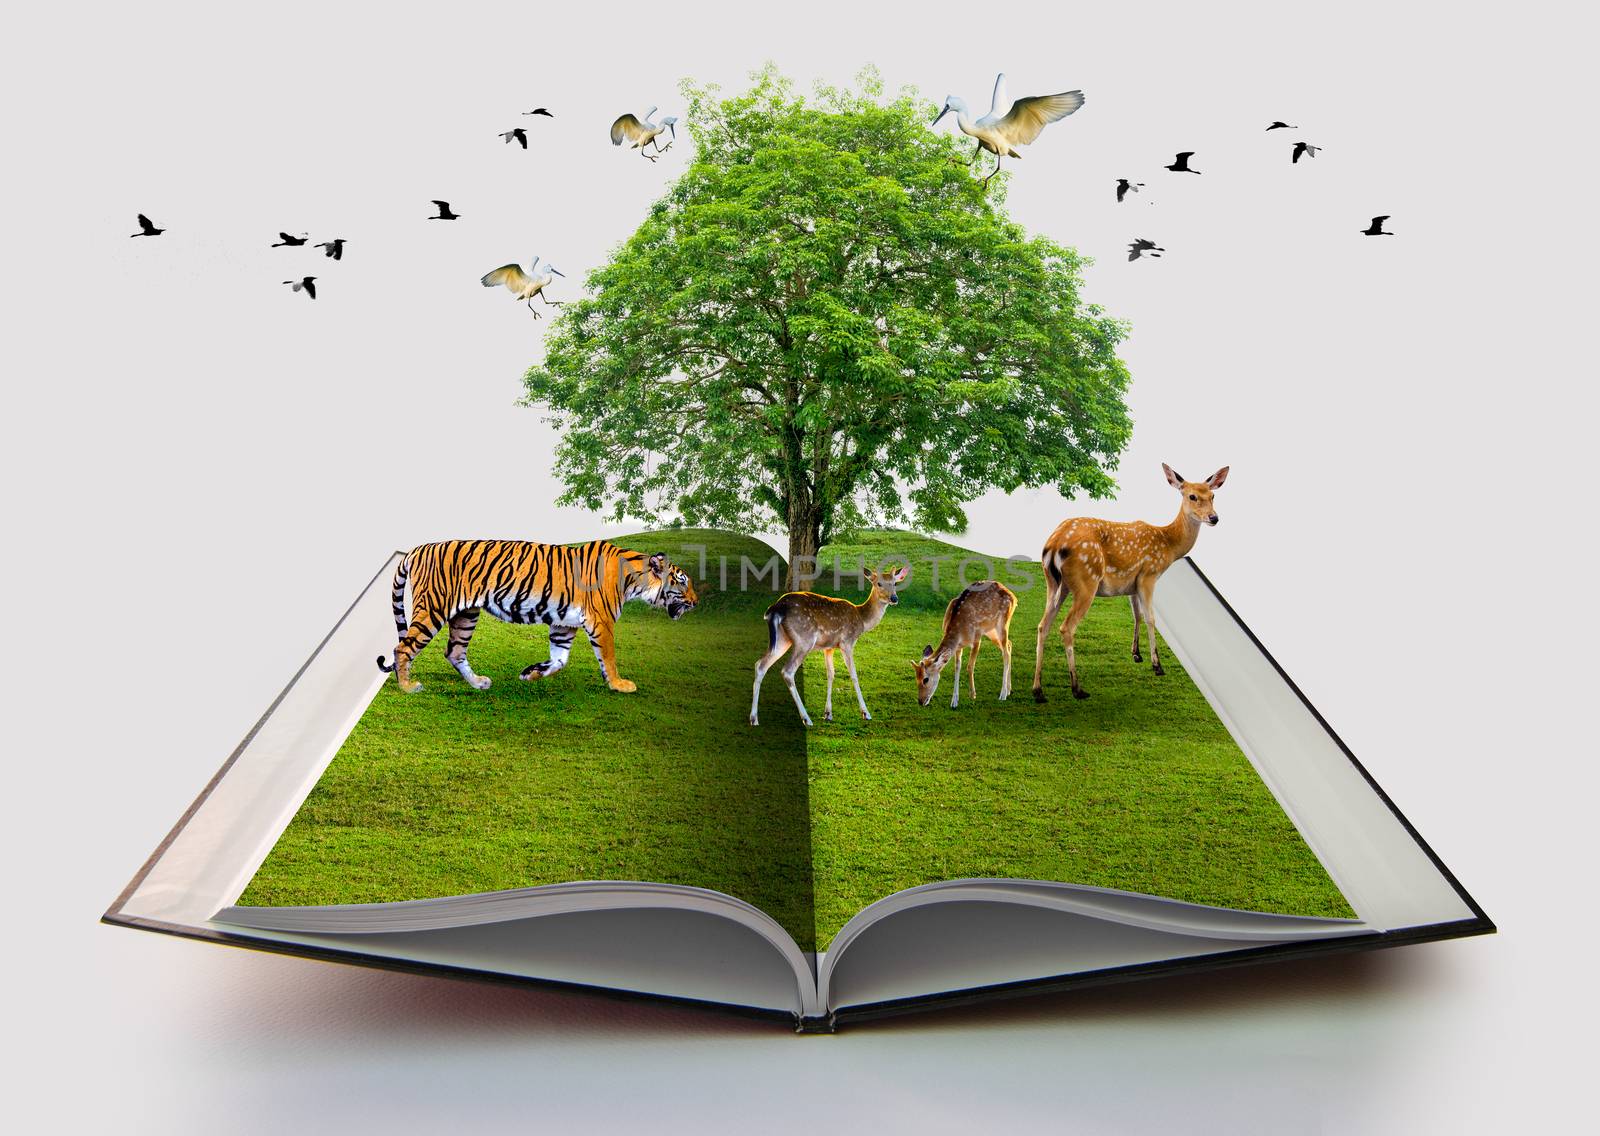 Wildlife Conservation tiger Deer Bird environment book of nature isolated on white open book in paper recycling 3d rendering book of nature with grass and tree growth on it over white background